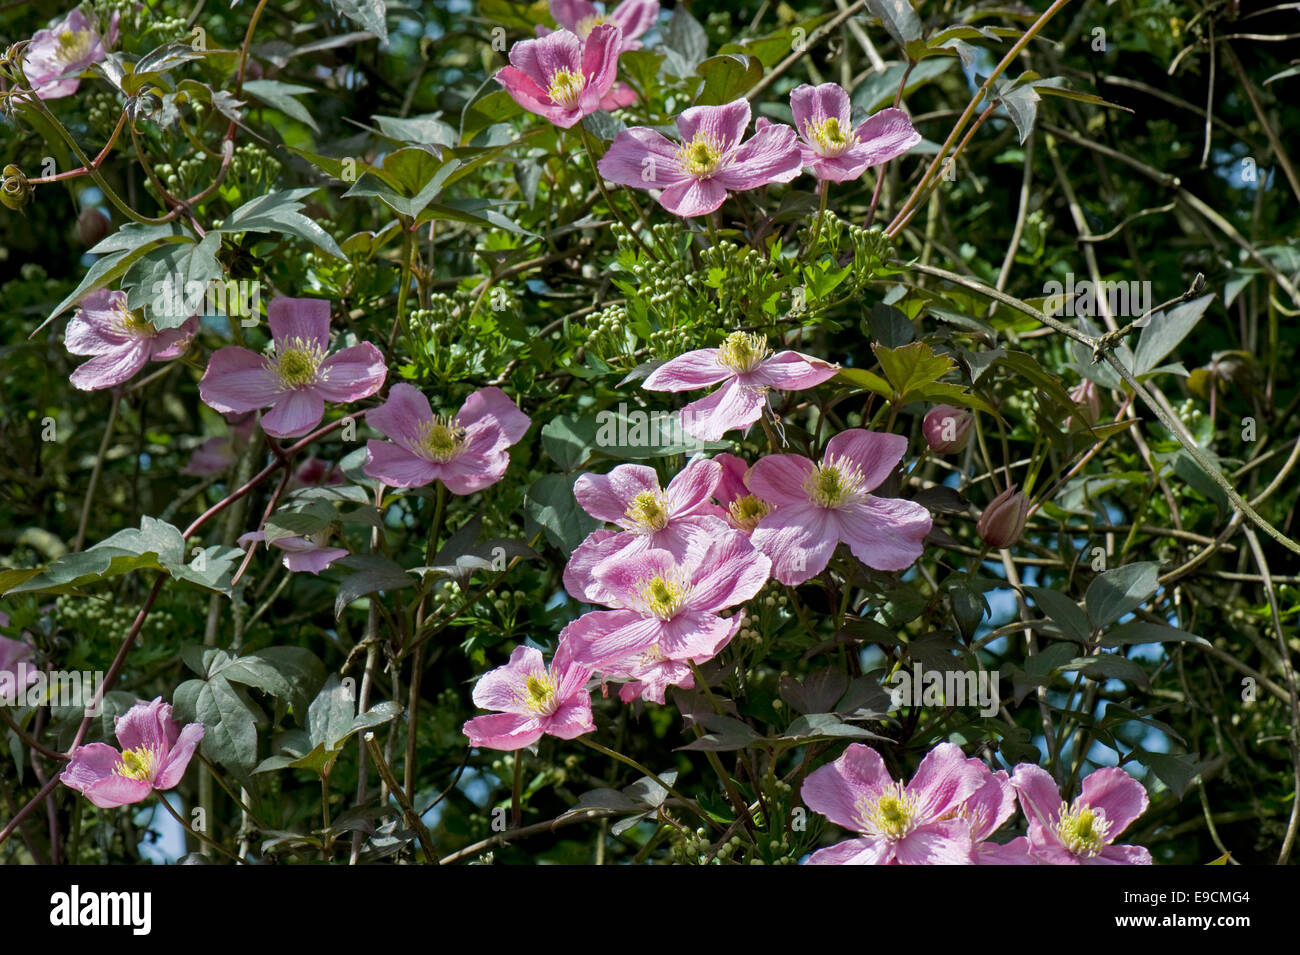 An old pink flowered Clematis montana climbing through the branches of a hawthorn tree Stock Photo